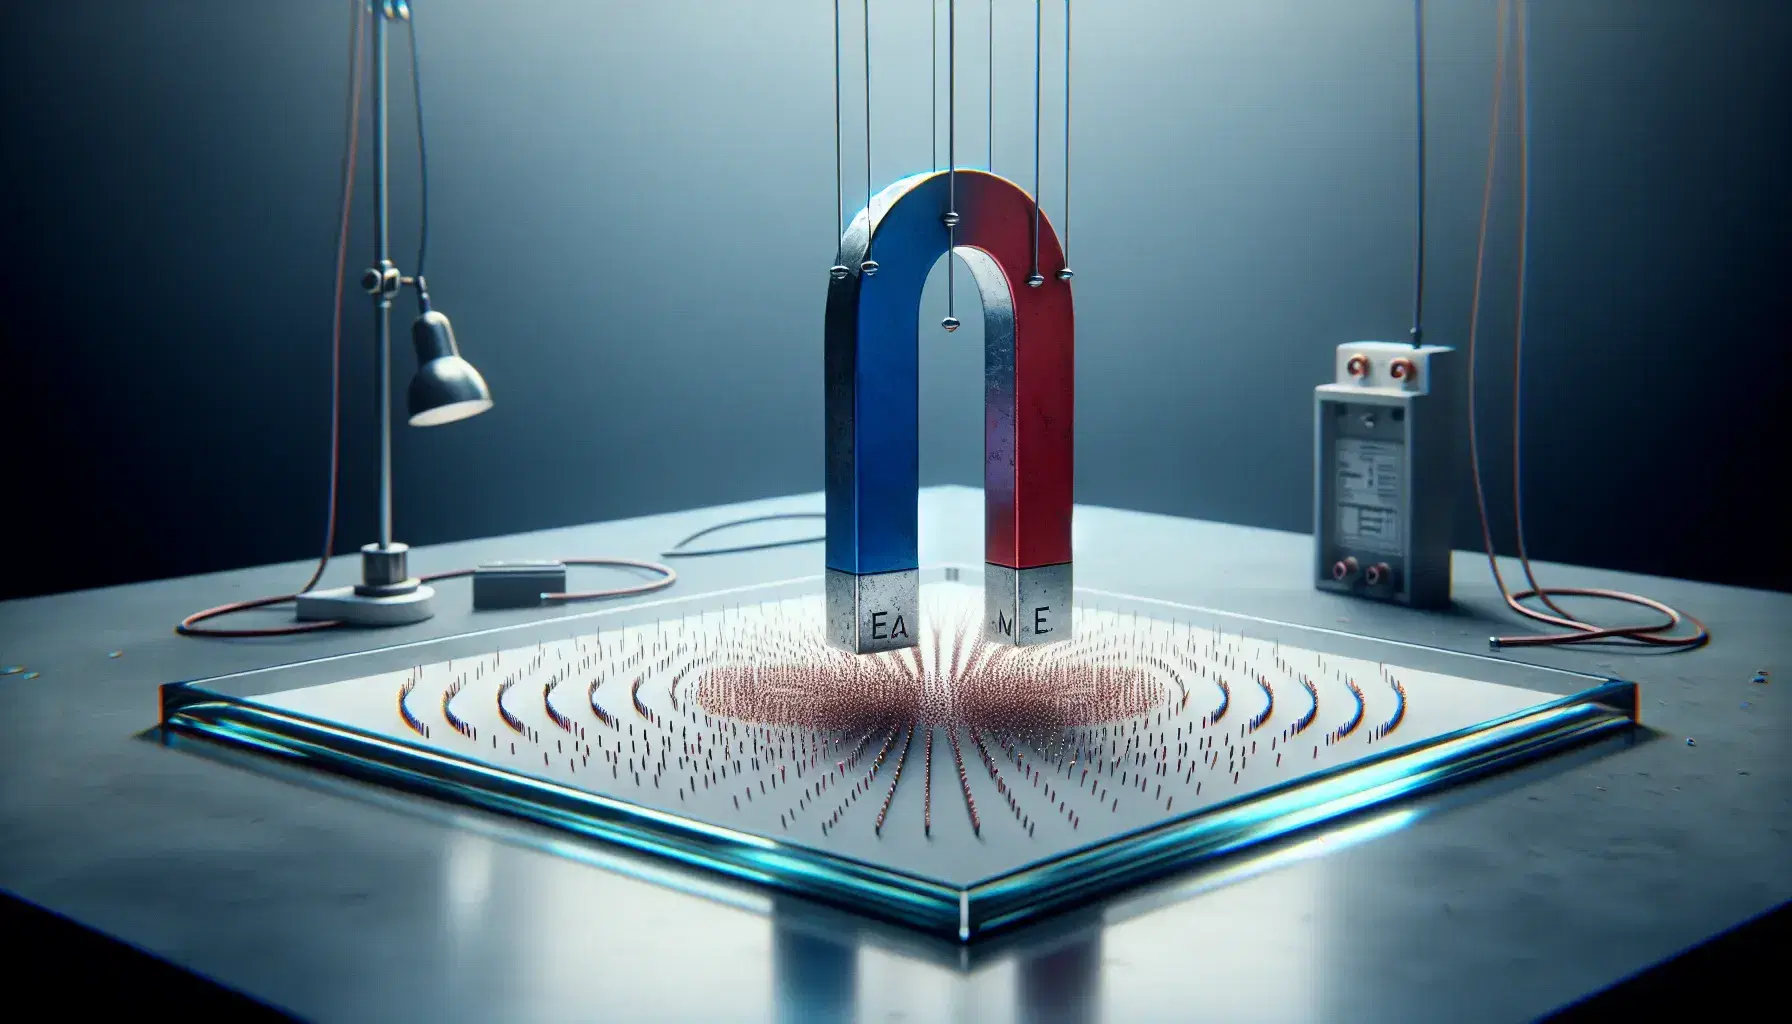 Laboratory red and blue U-magnet on paper with iron filings showing magnetic field lines, metal coil and circuit above.